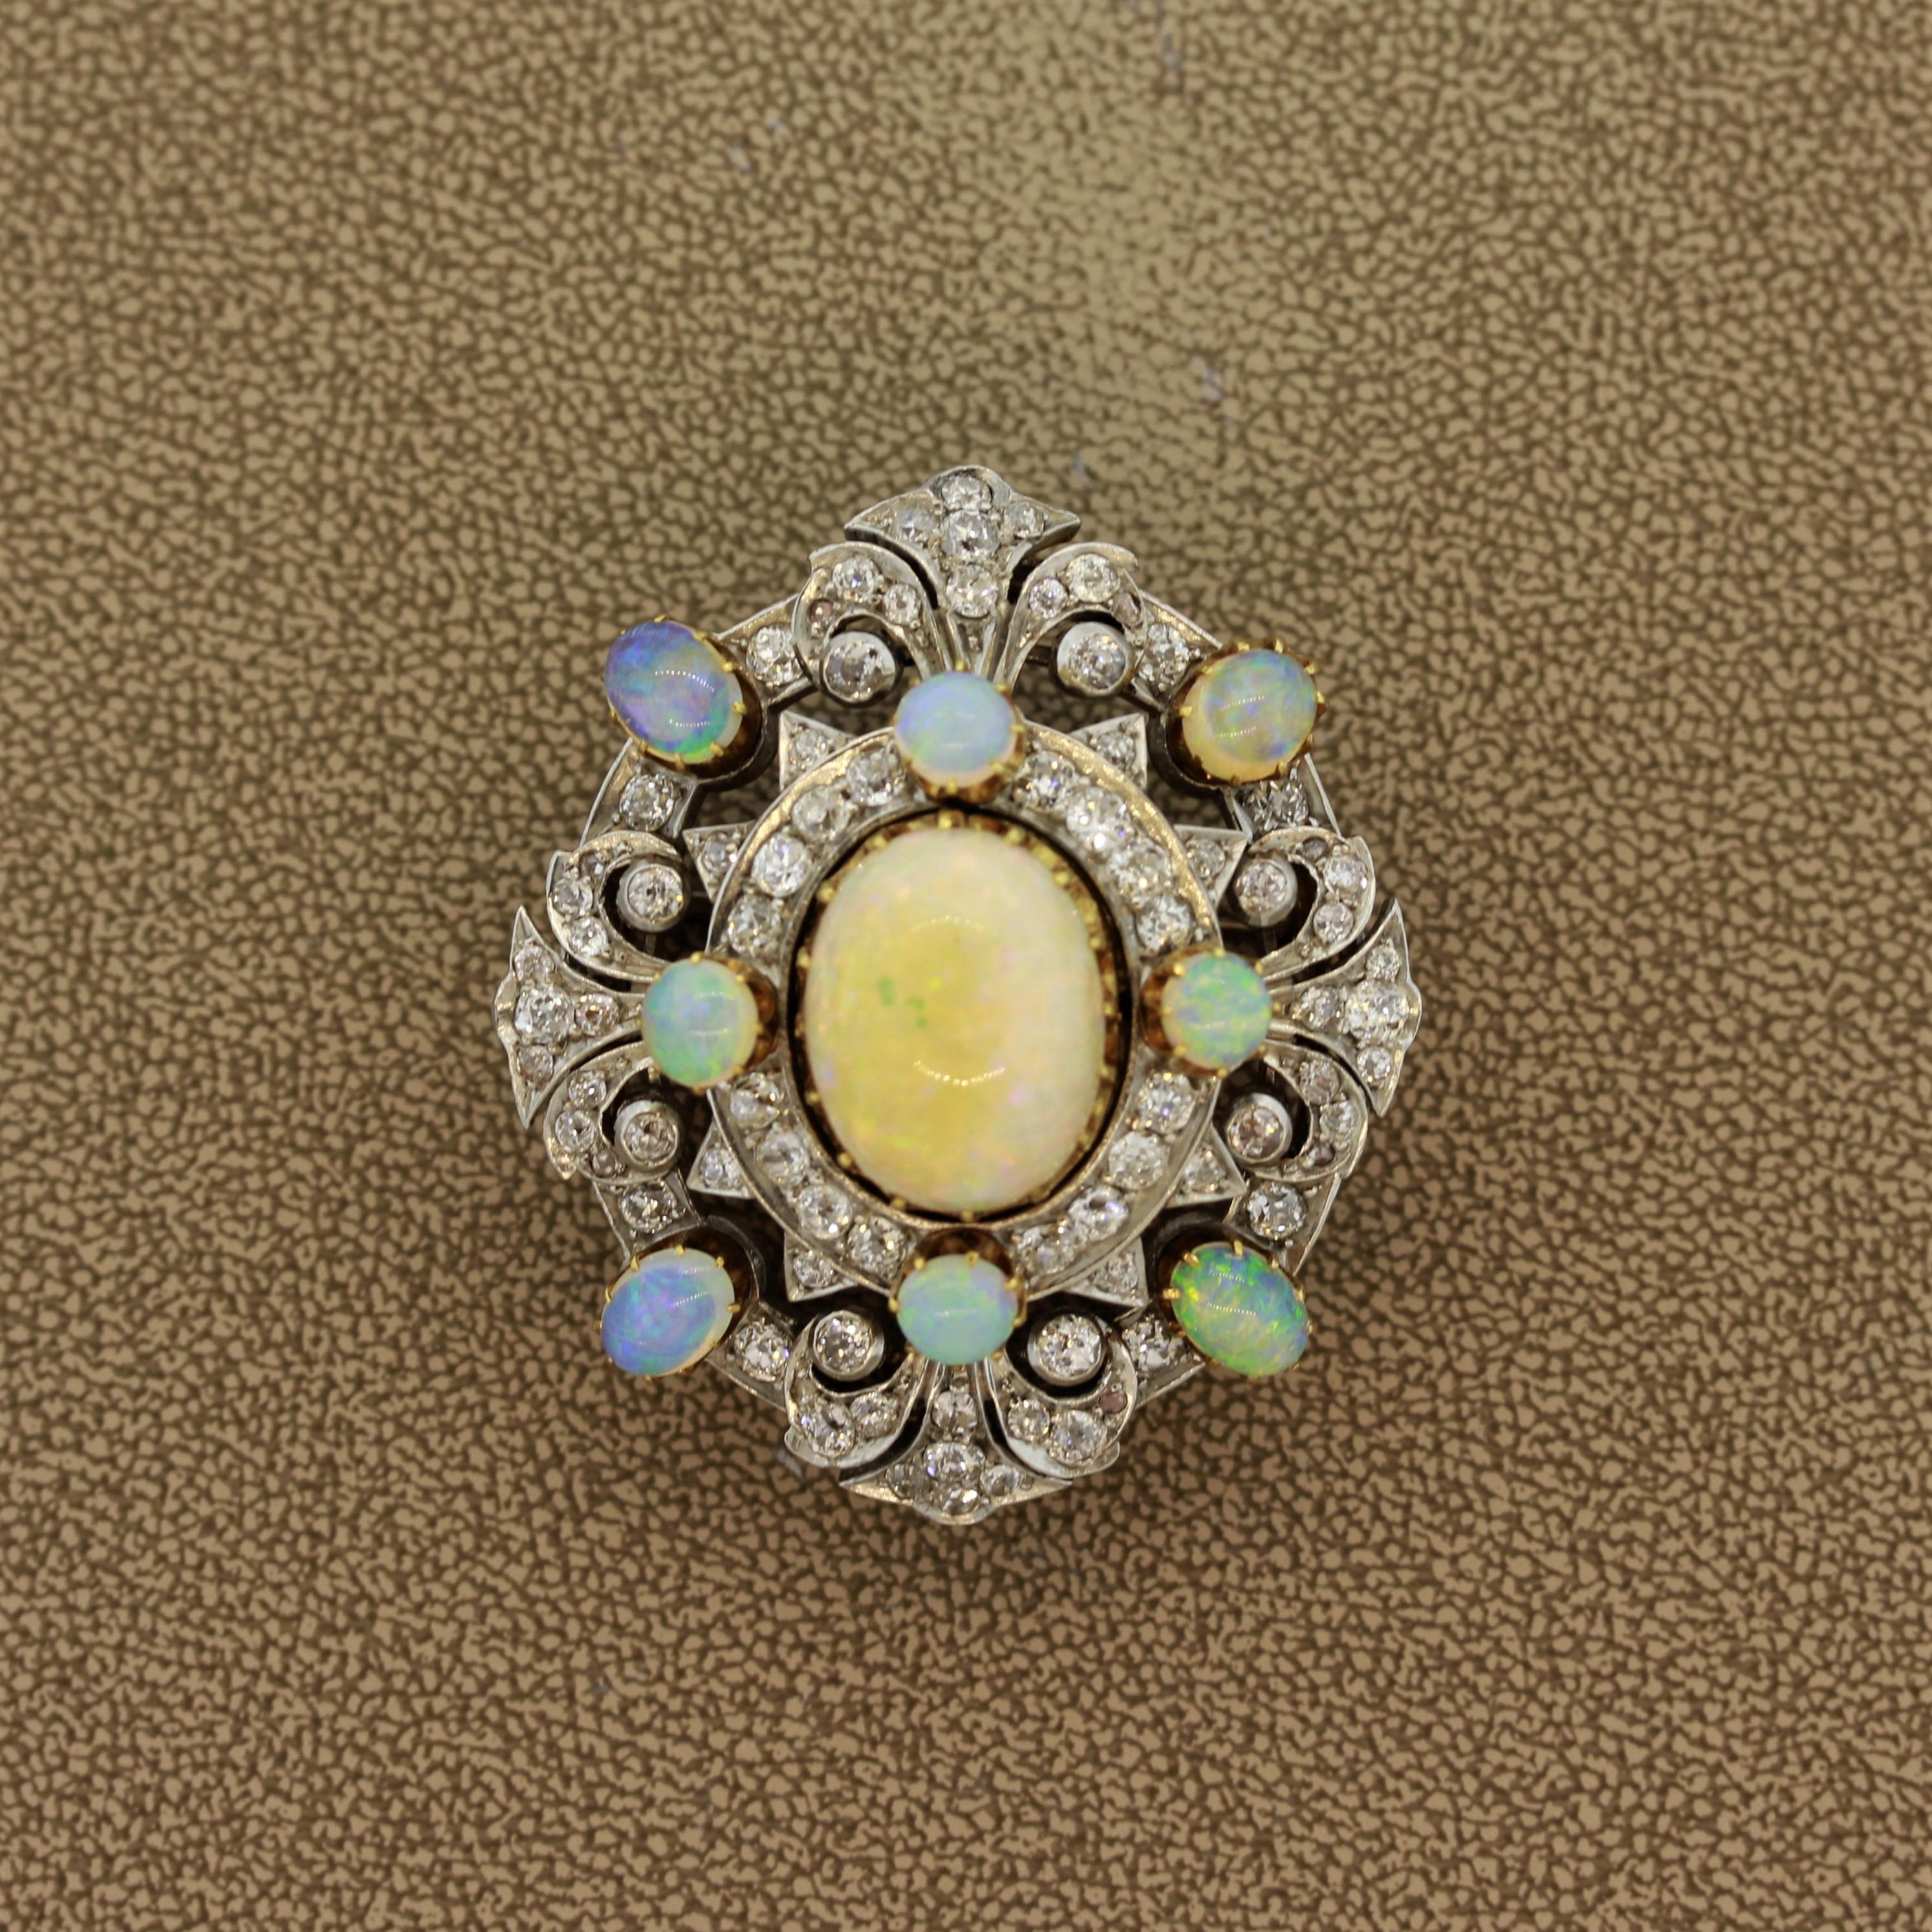 This early 1900’s treasure features 8 crystal opals and 1 large white opal in the center. It is accented by approximately 3 carats of old round european cut diamonds which are set in 14k gold. In classic Edwardian style the piece is platinum topped